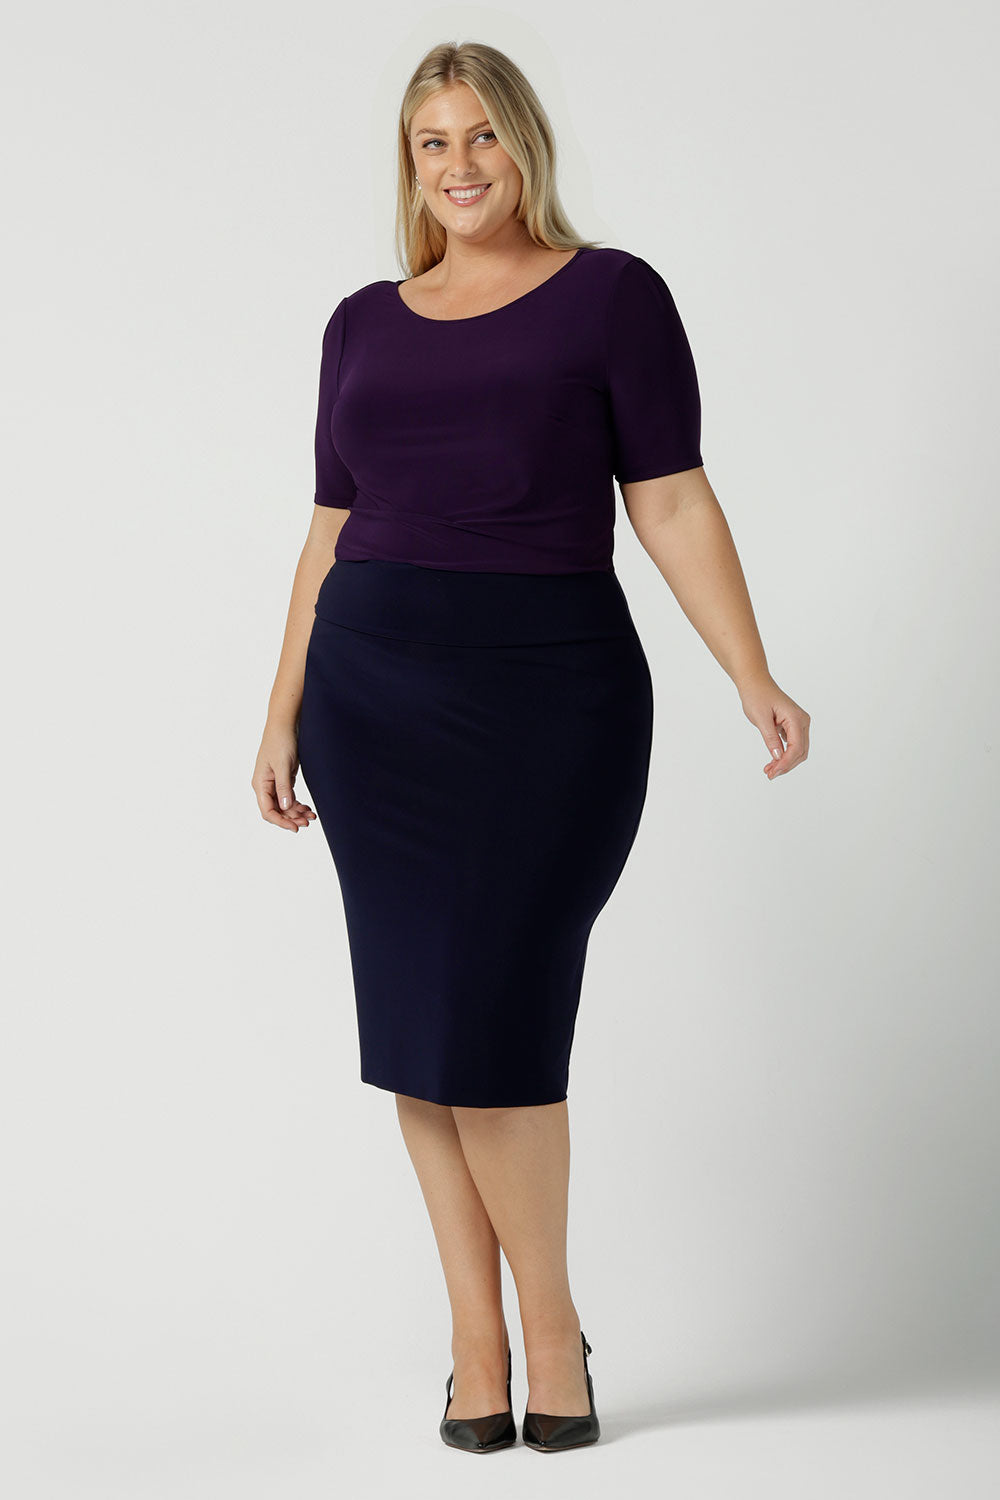 Size 18 woman wears the Andi skirt in Navy. A made in Australia work skirt for women. Styled back with Amethyst purple Ziggy Top. This skirt is easy care for work and made in comfortable jersey.   